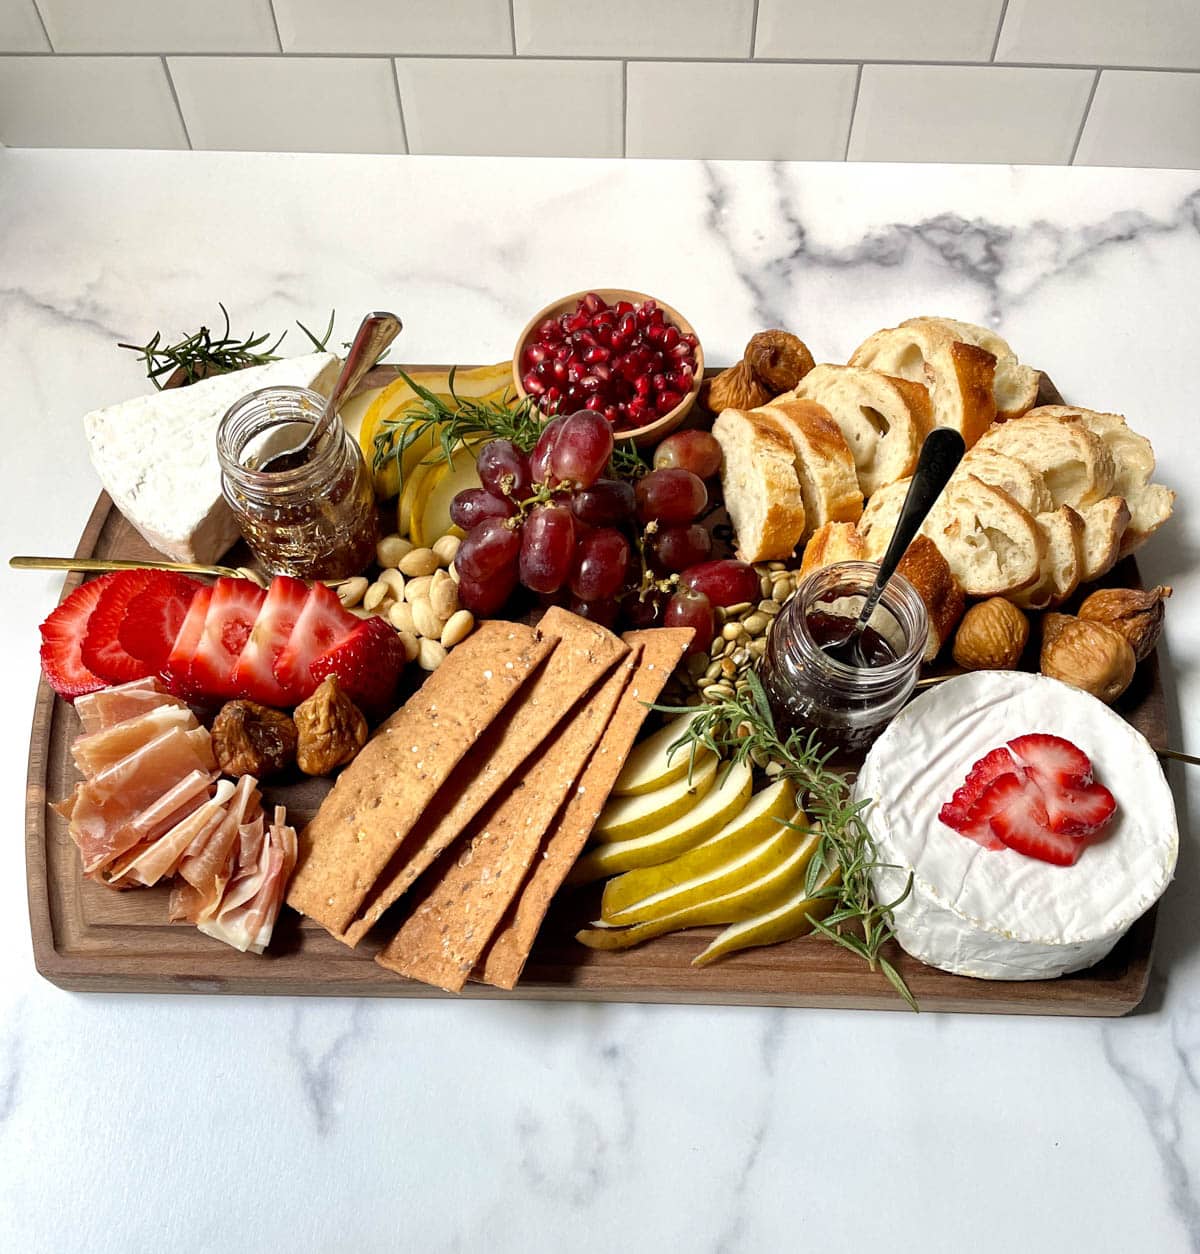 Brie charcuterie board with fruit, nuts, bread, and crackers.